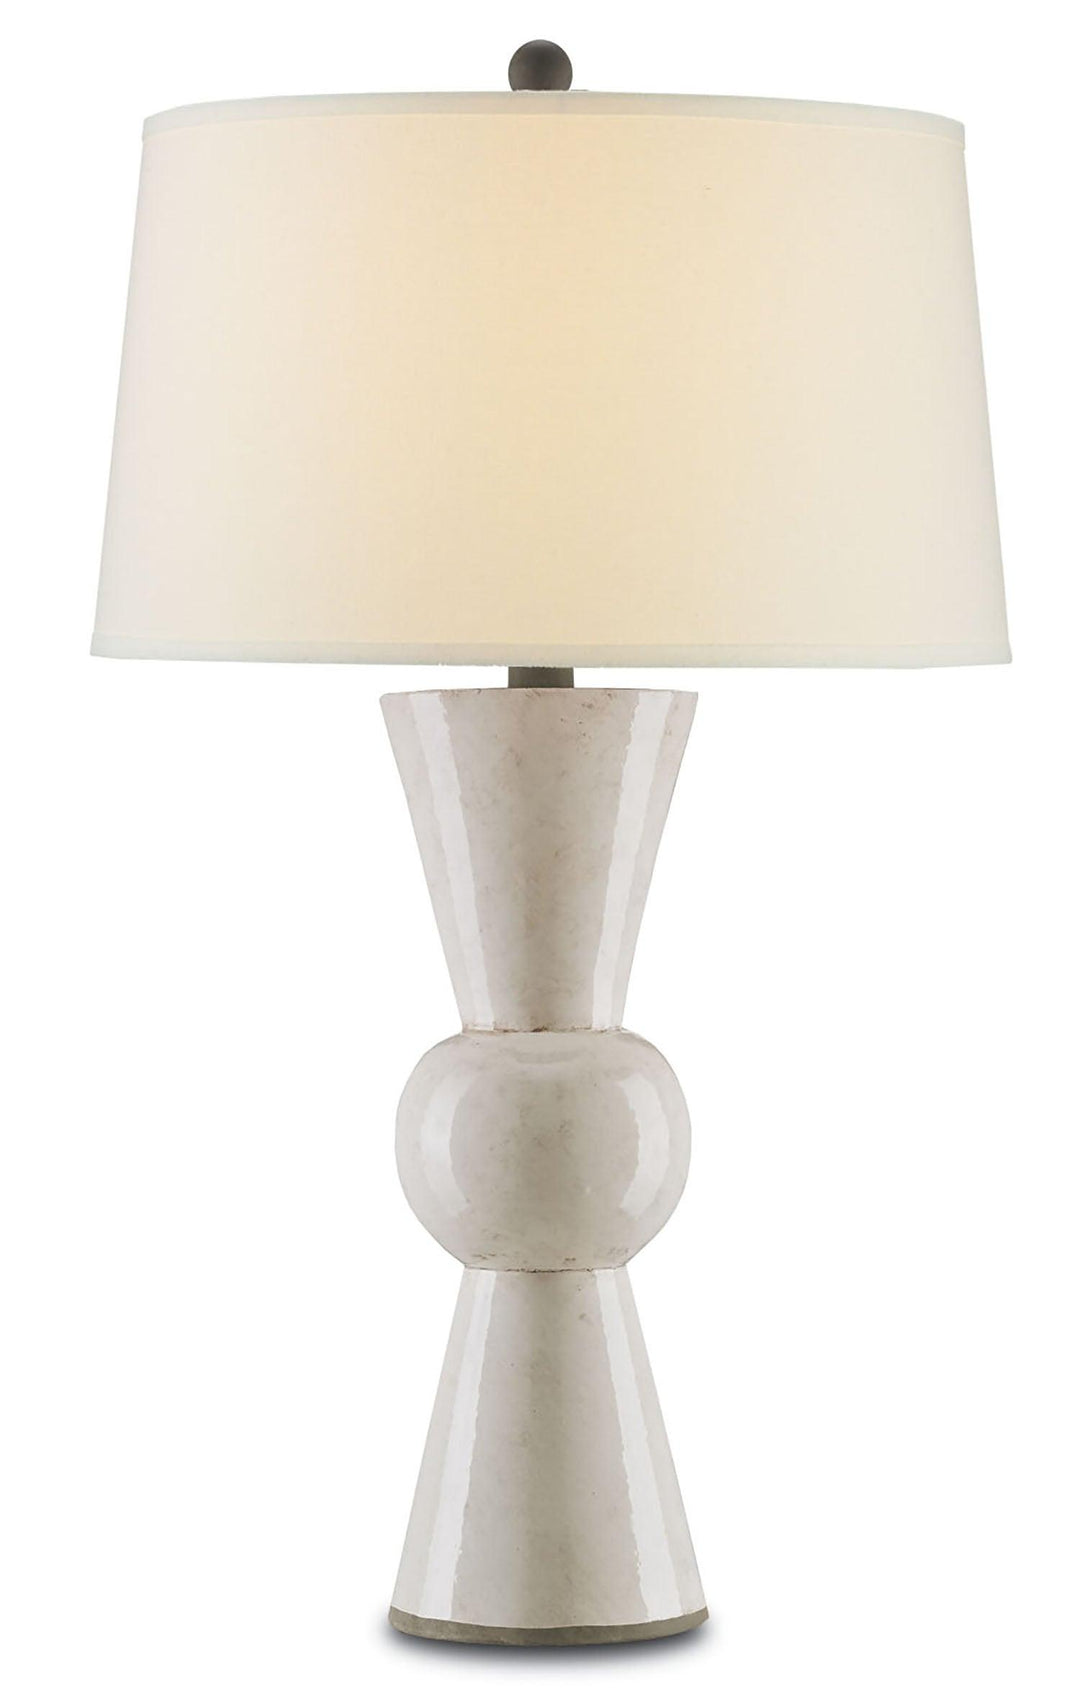 Upbeat White Table Lamp - Casey & Company